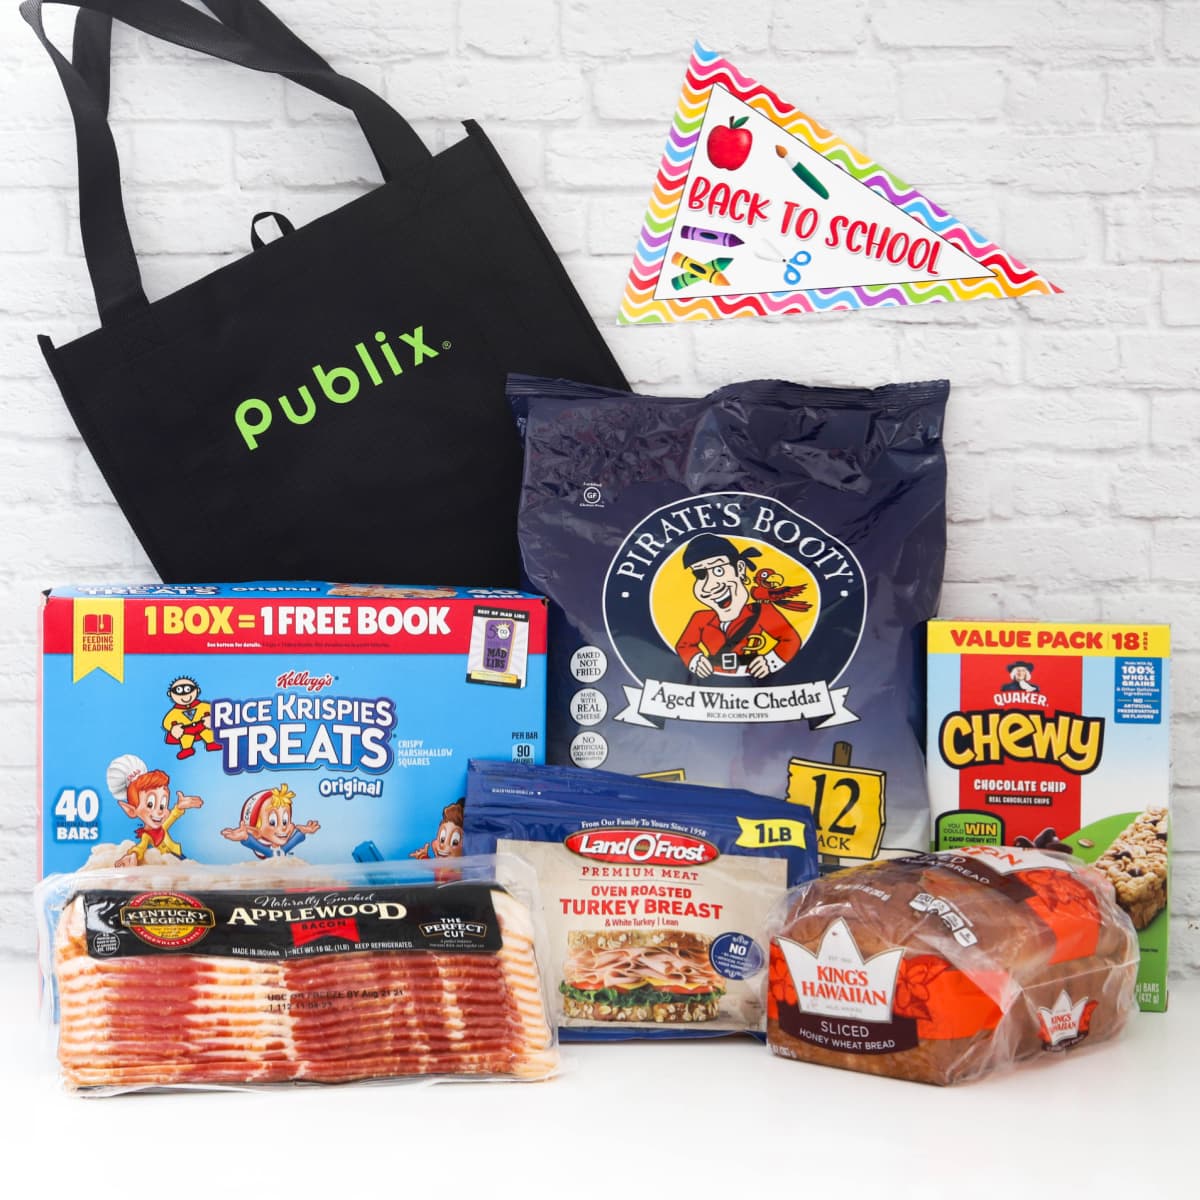 Food on sale during the Publix Back to School promotion